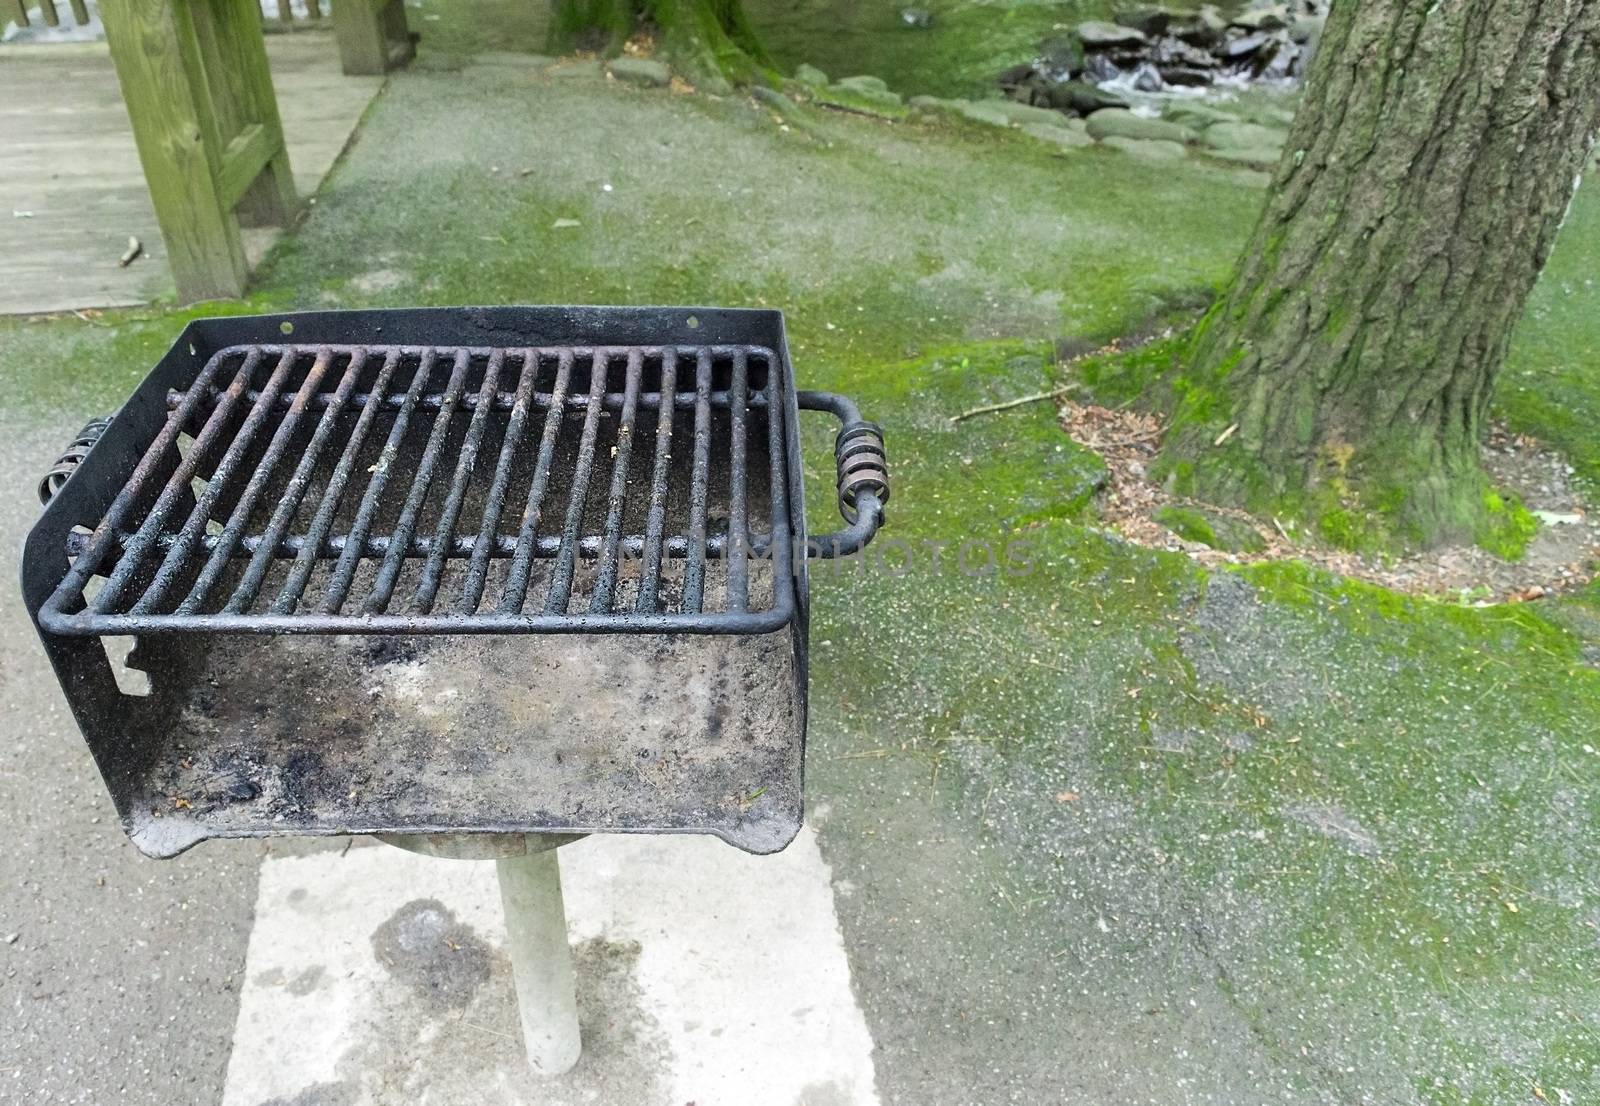 Used Grill in Picnic Area With Copy Space by stockbuster1